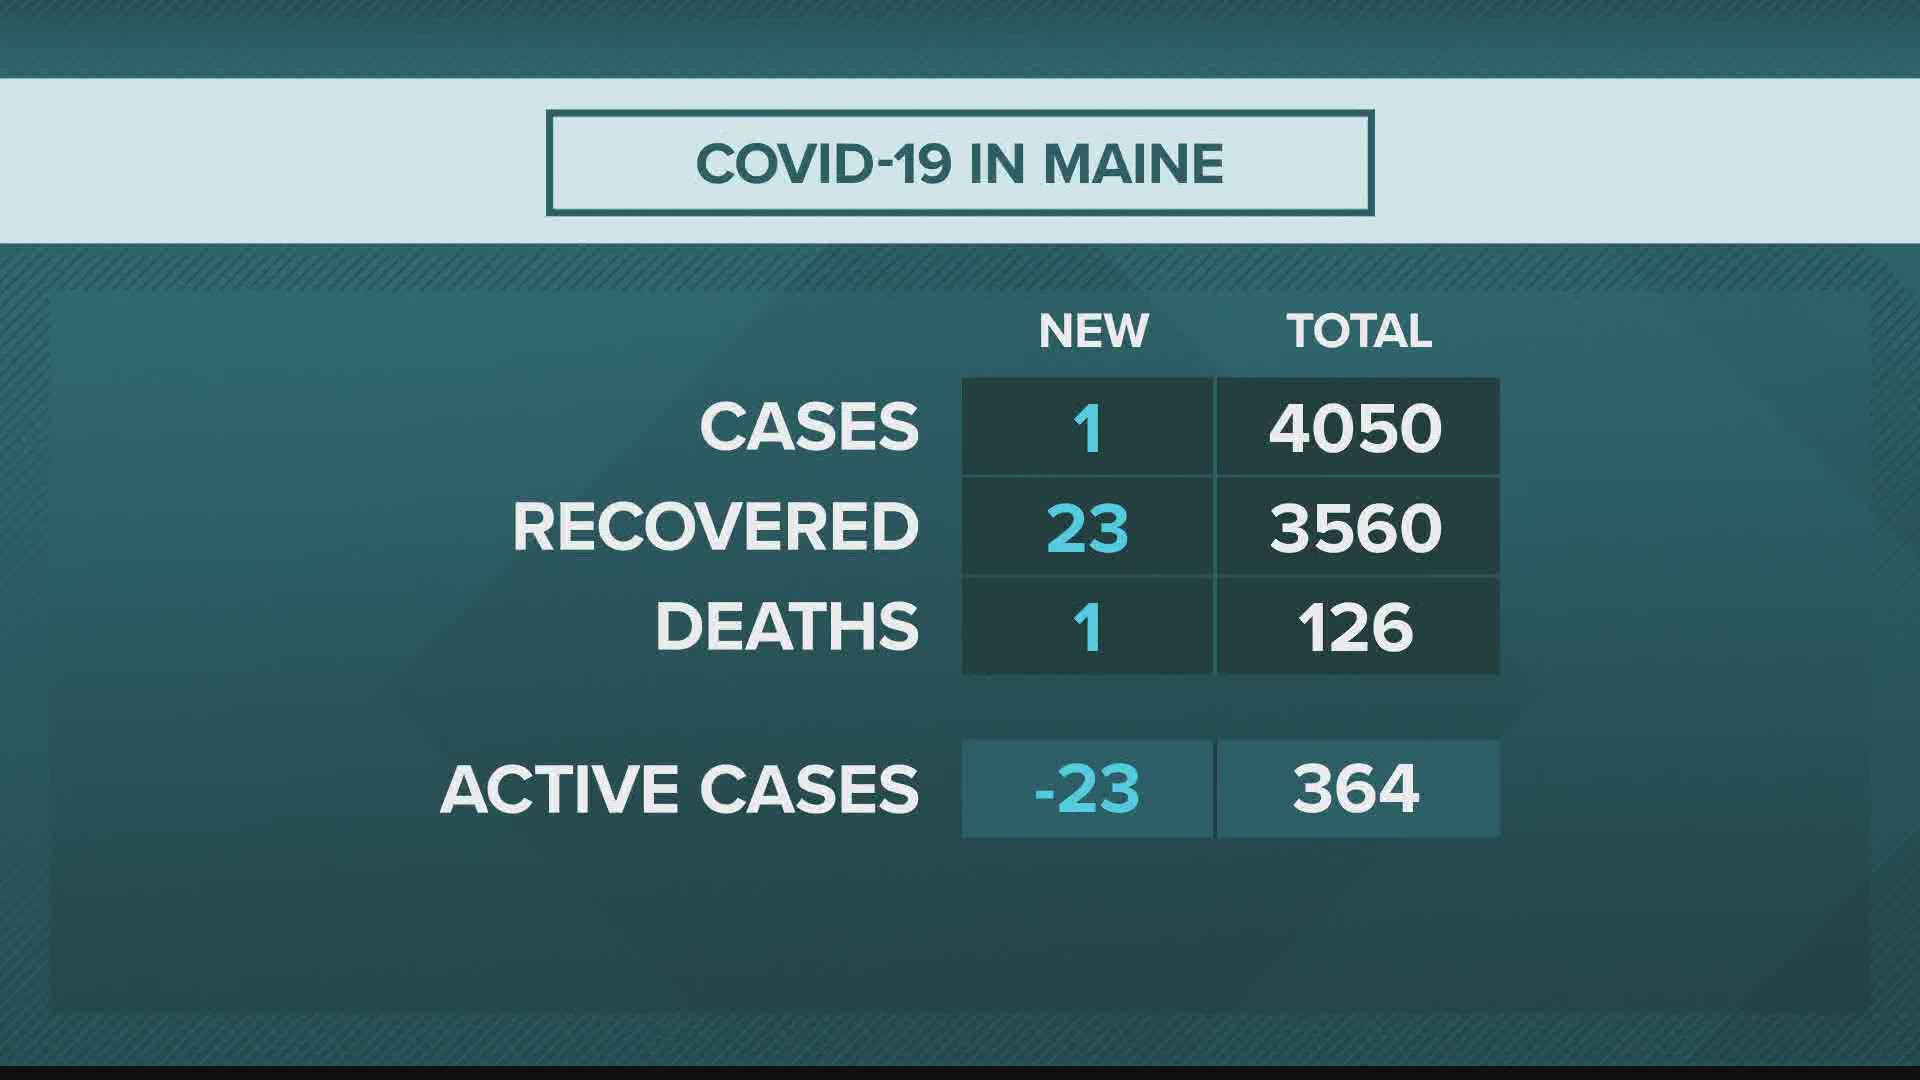 Maine CDC reports one of the smallest increases in new COVID-19 cases since the pandemic began